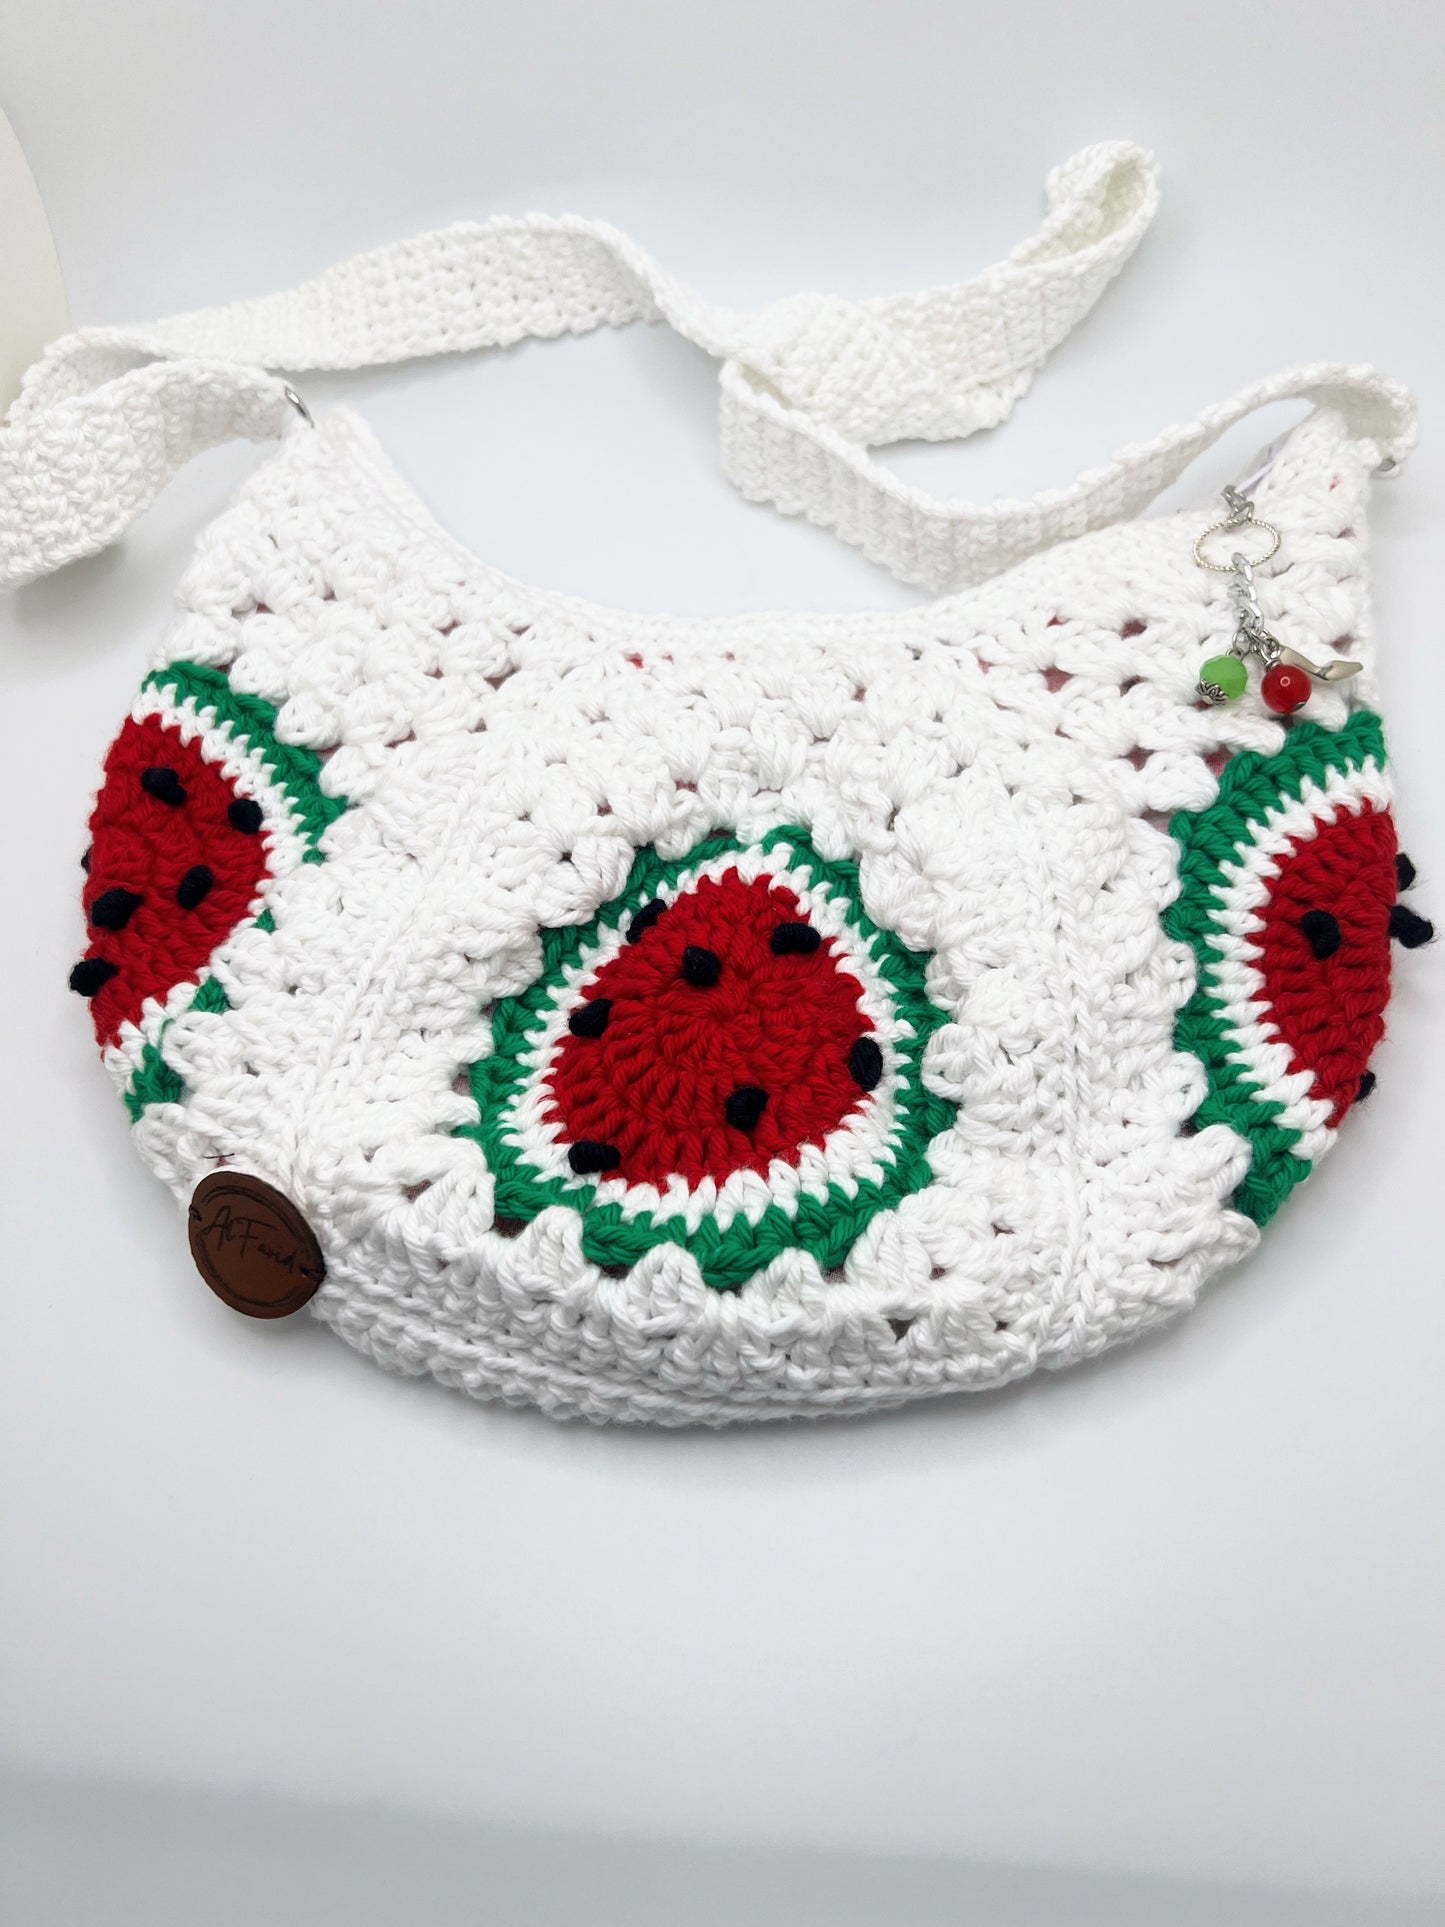 Crochet white Bag With Watermelon Slices - For Girls & Teens